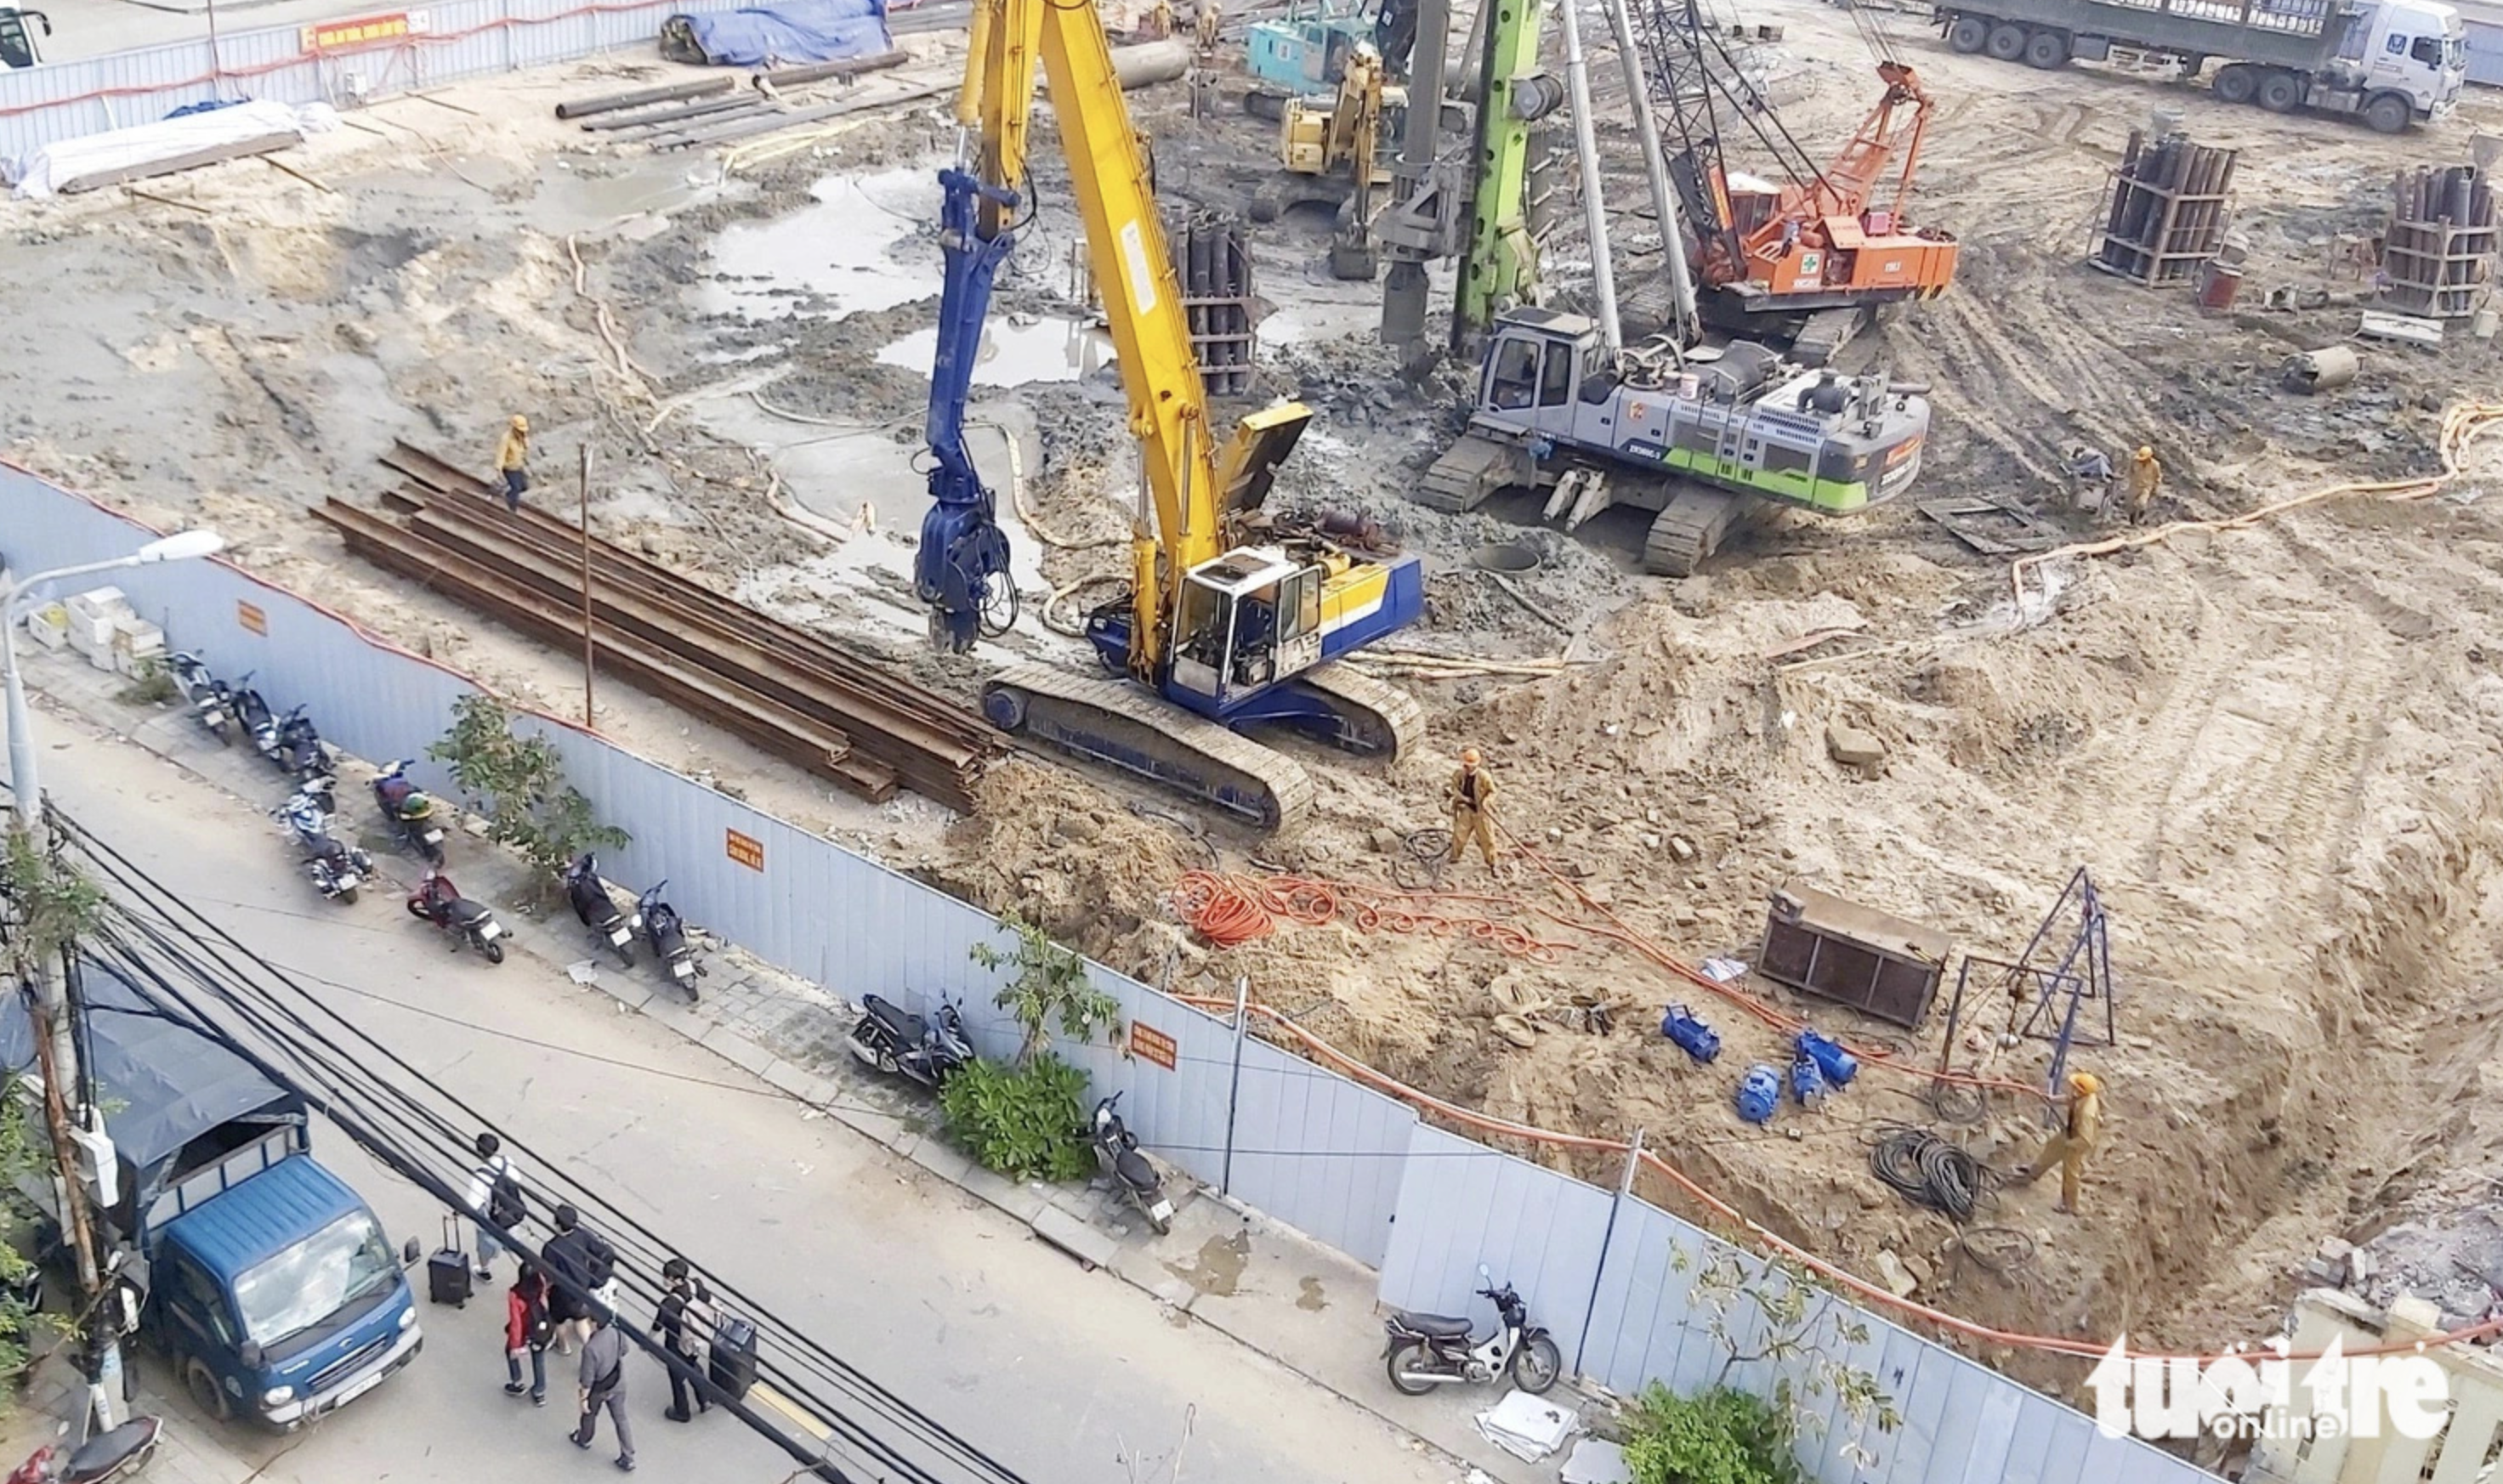 Hotels in Da Nang plagued by noisy construction